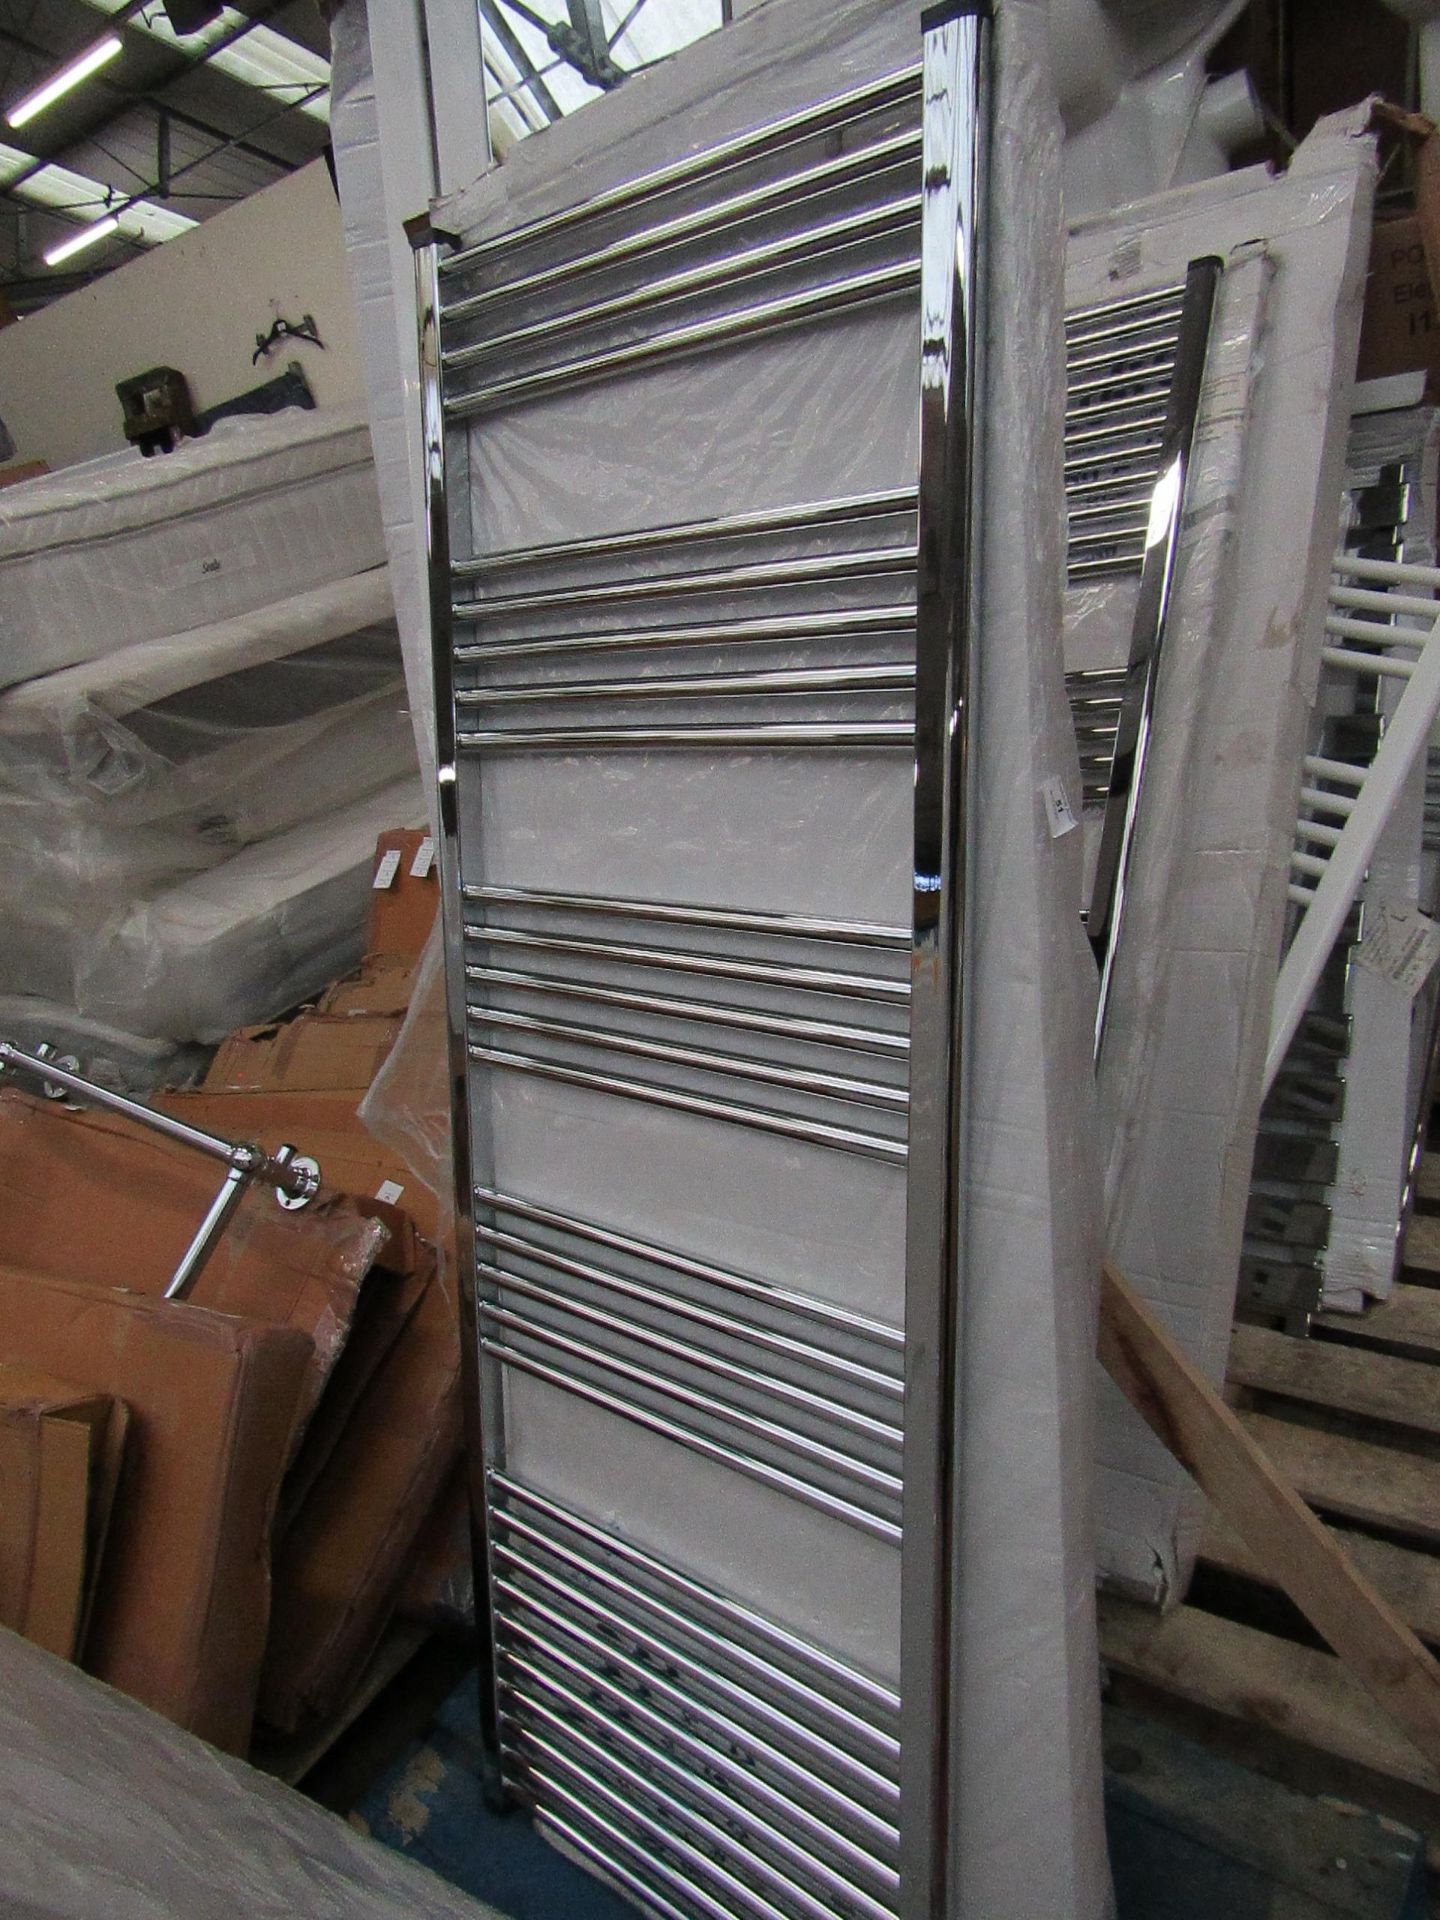 Loco straight towel radiator 1600 x 600, ex-display and boxed. Please note, this lot may contain